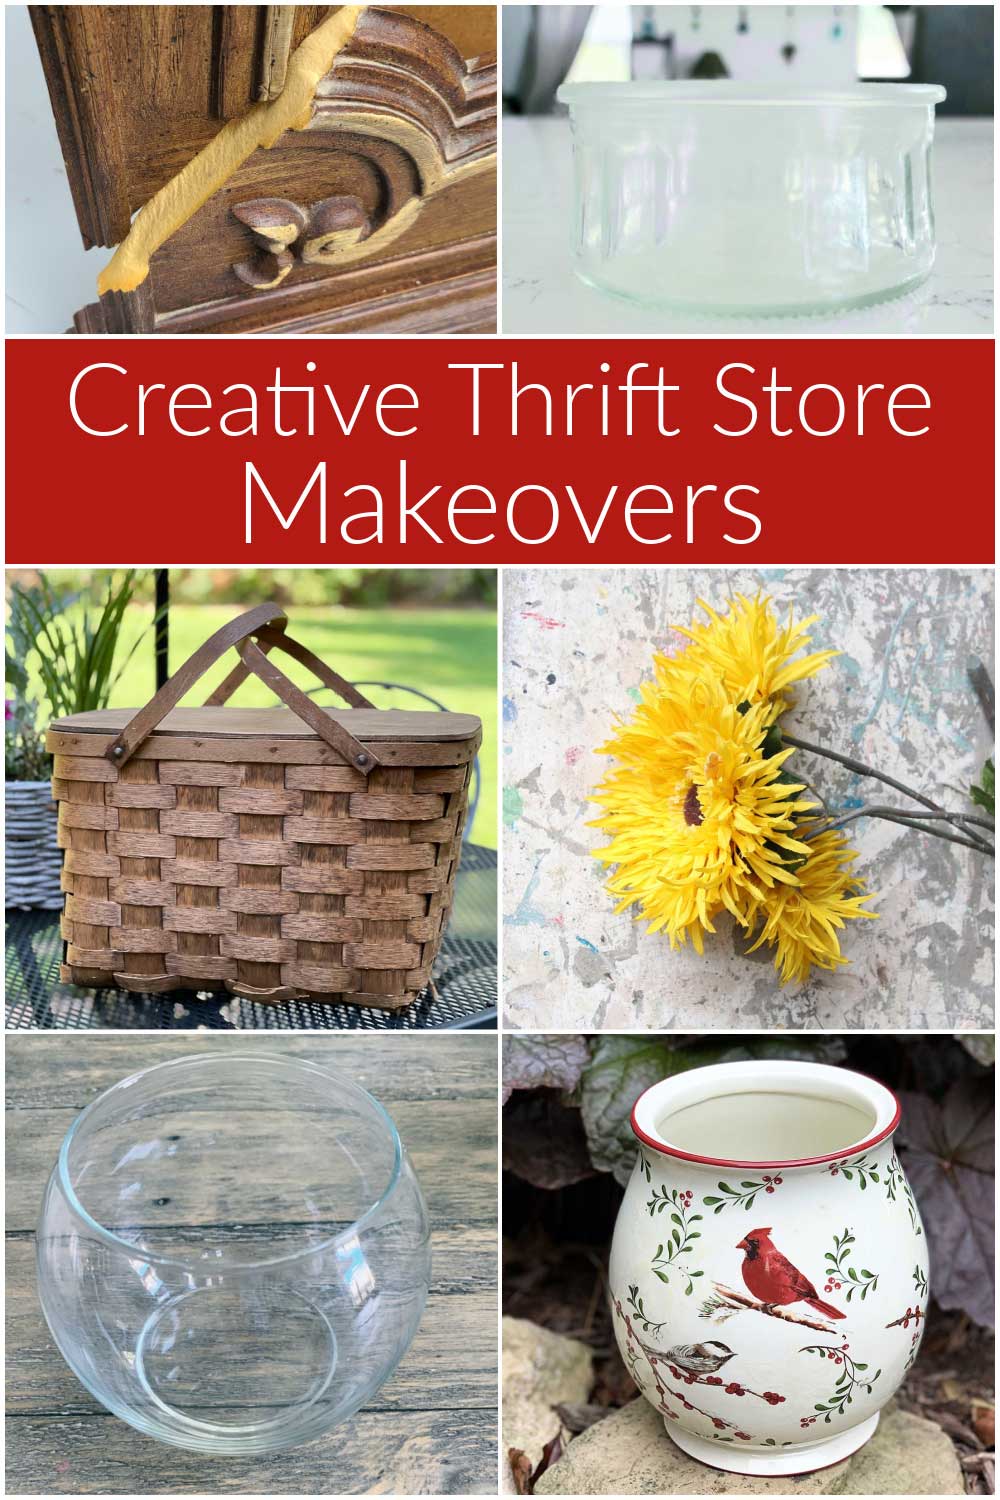 Upcycling projects made with items commonly found at thrift stores or in your closet and cupboards.